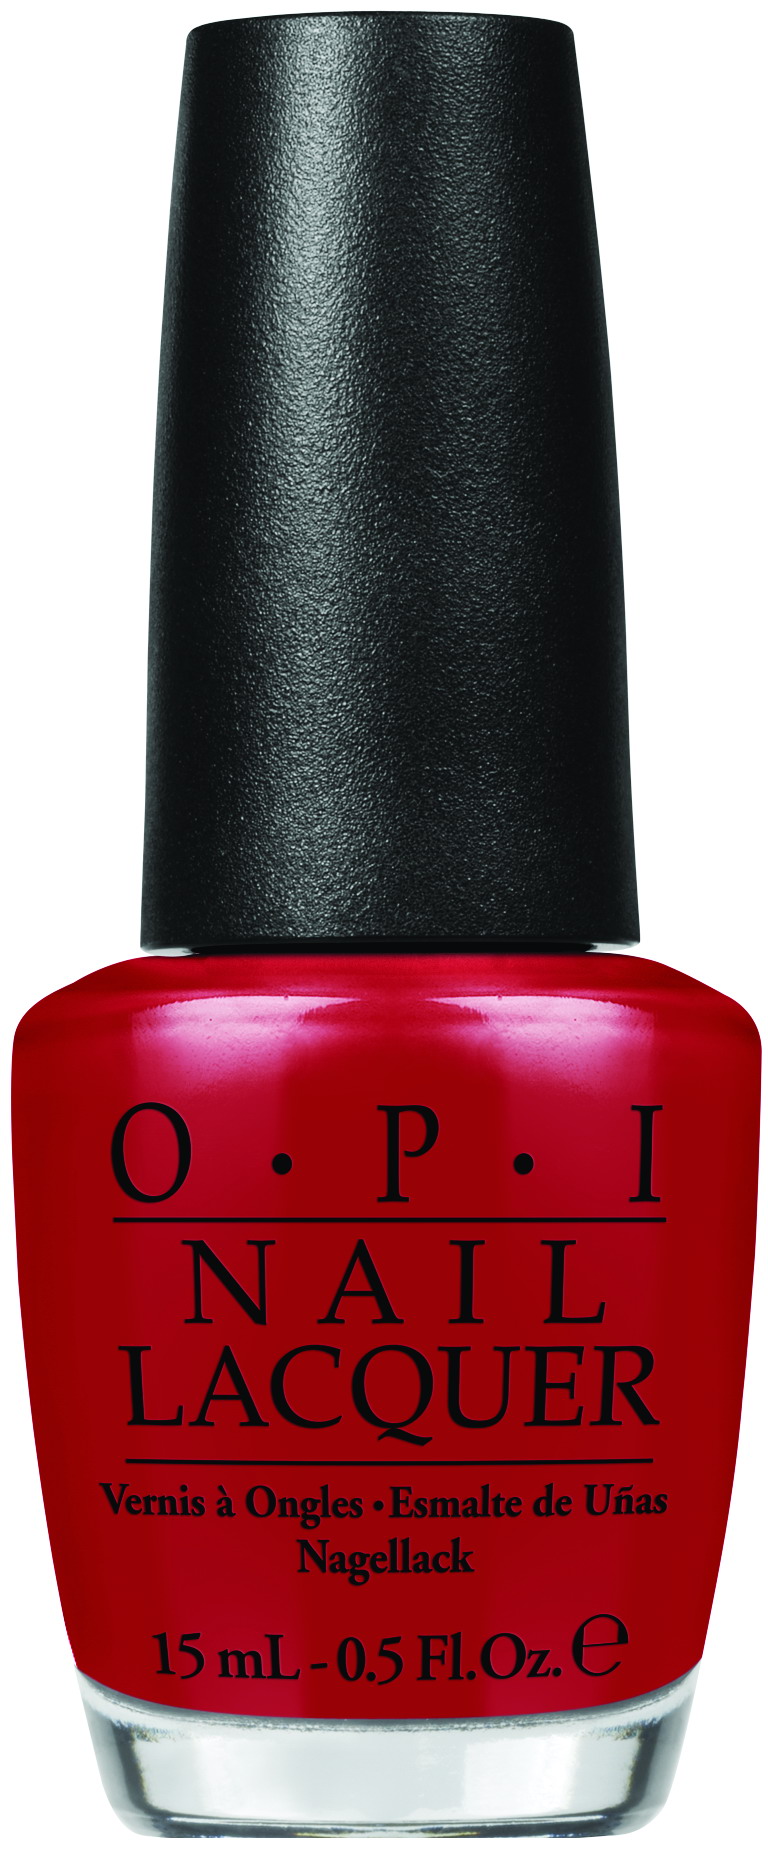 OPI Nail Lacquer Amore at the Grand Central